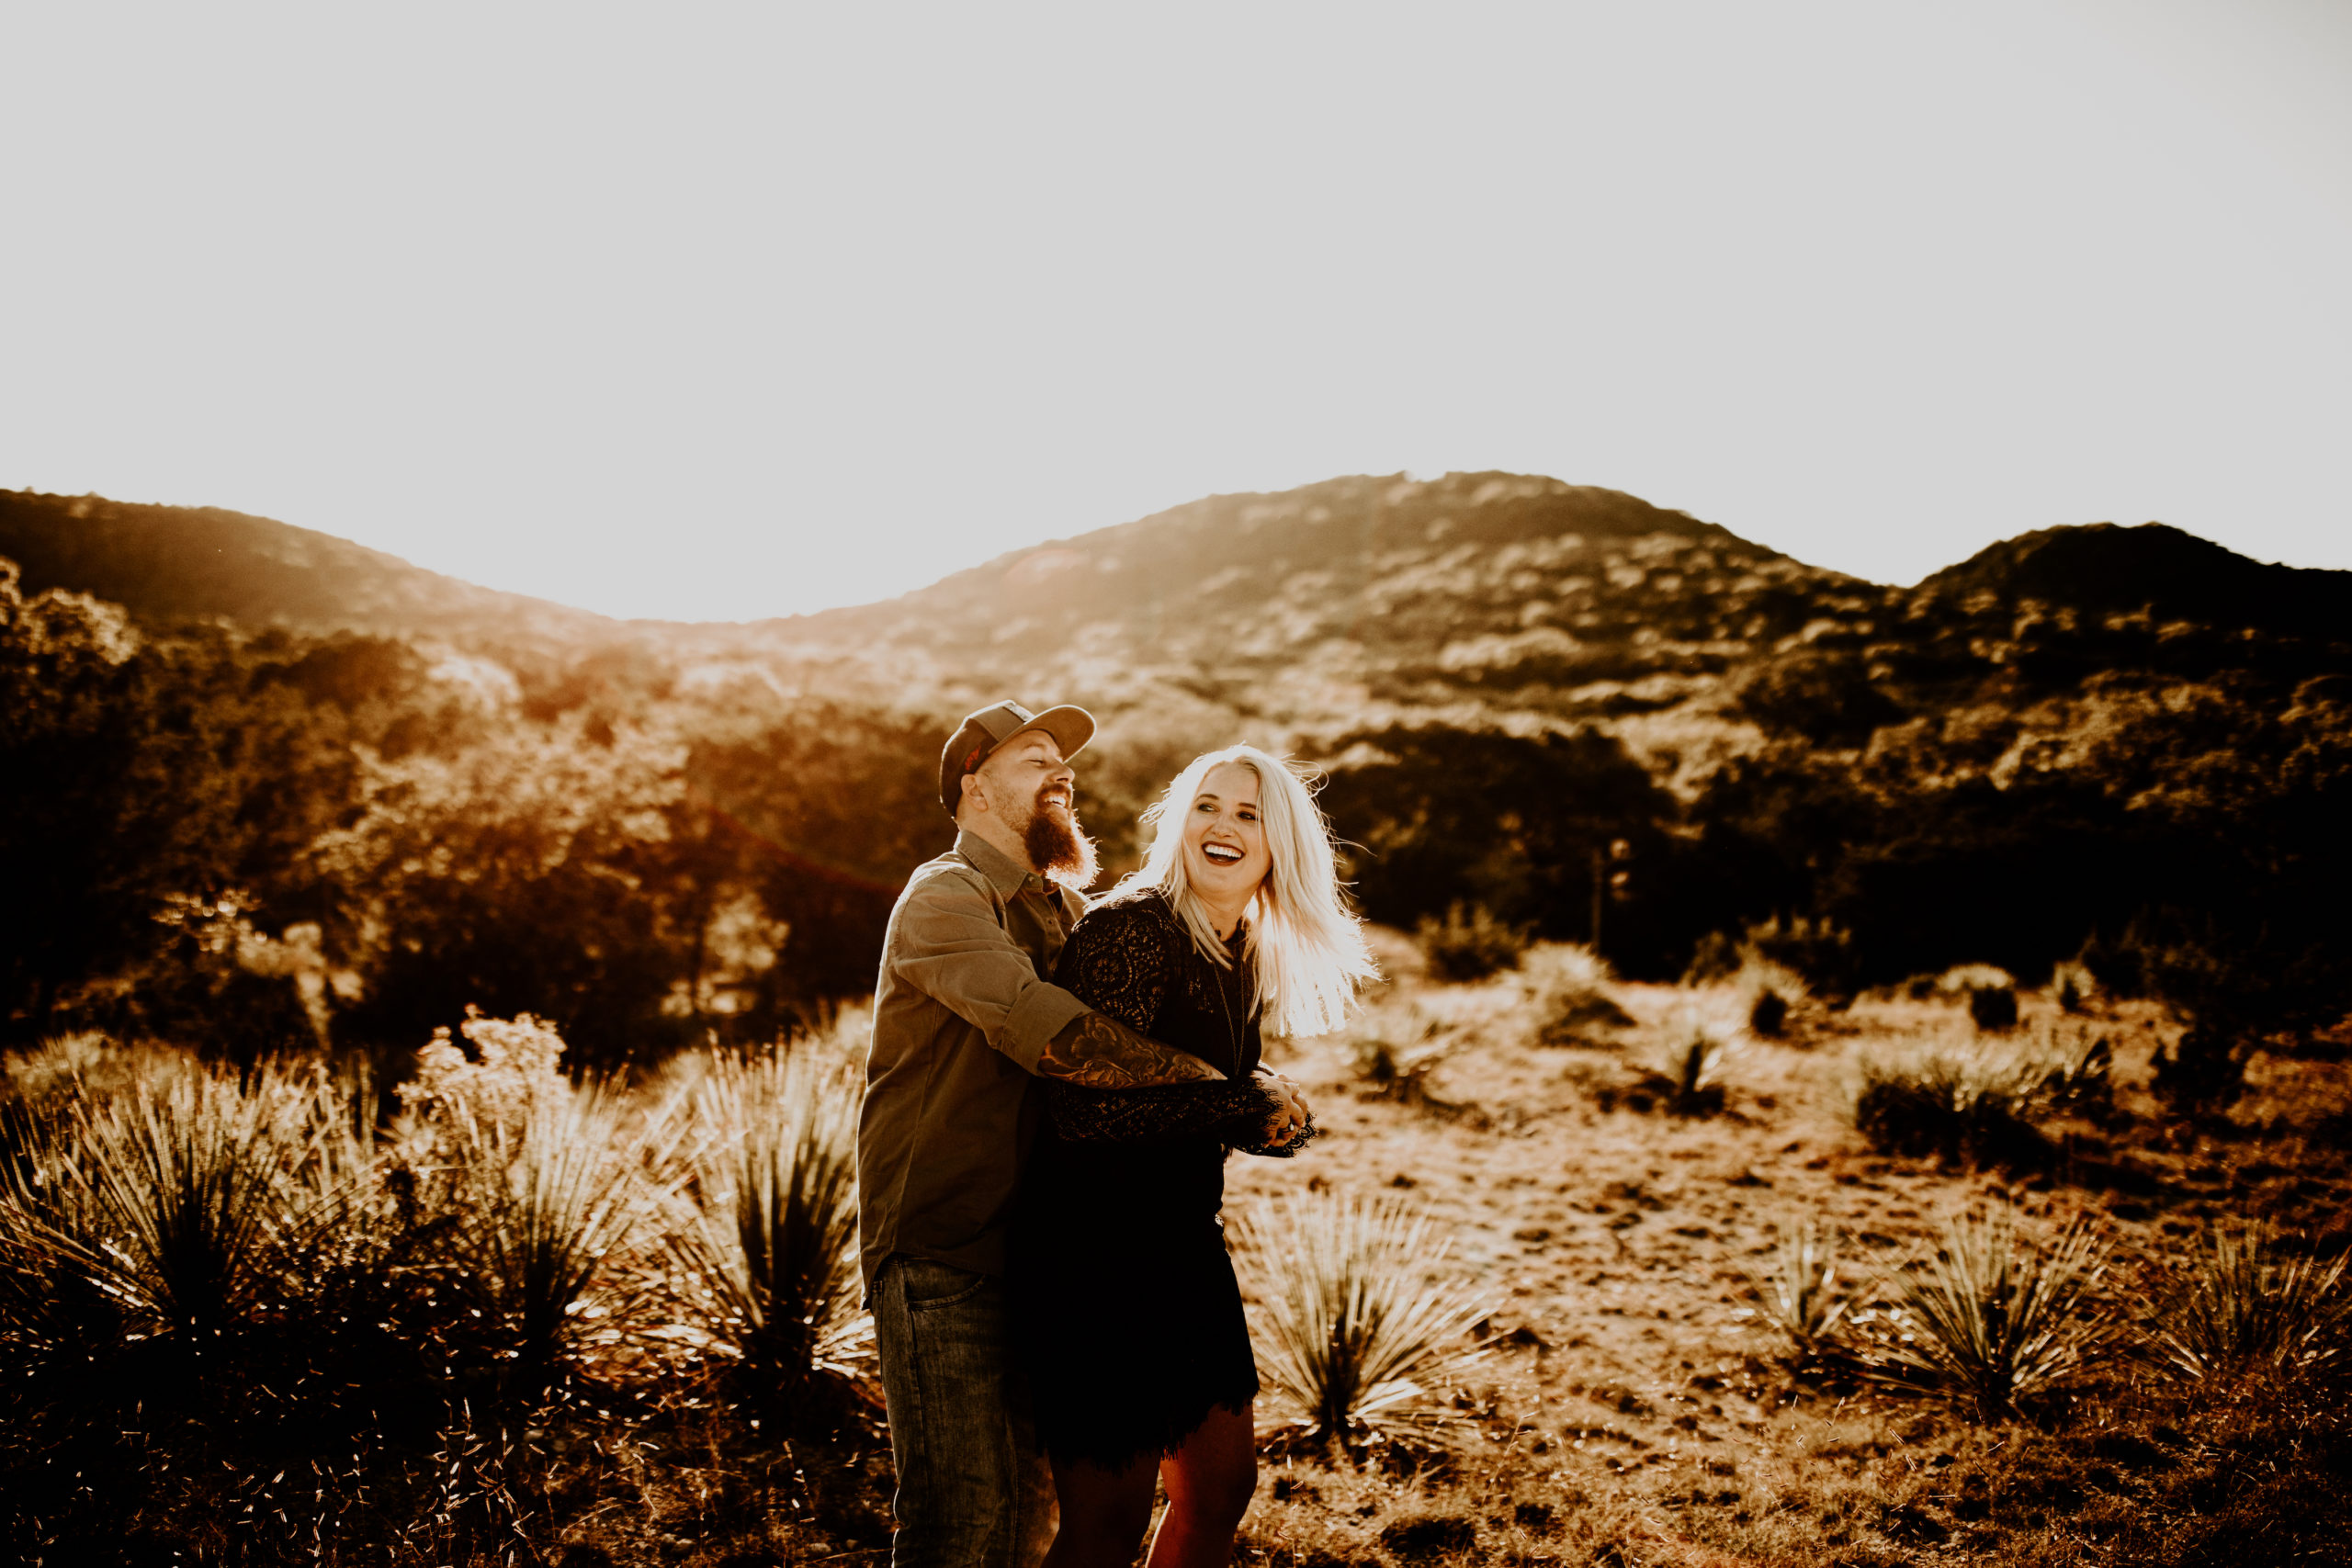 engagement photo shoot in the Texas desert hills in background